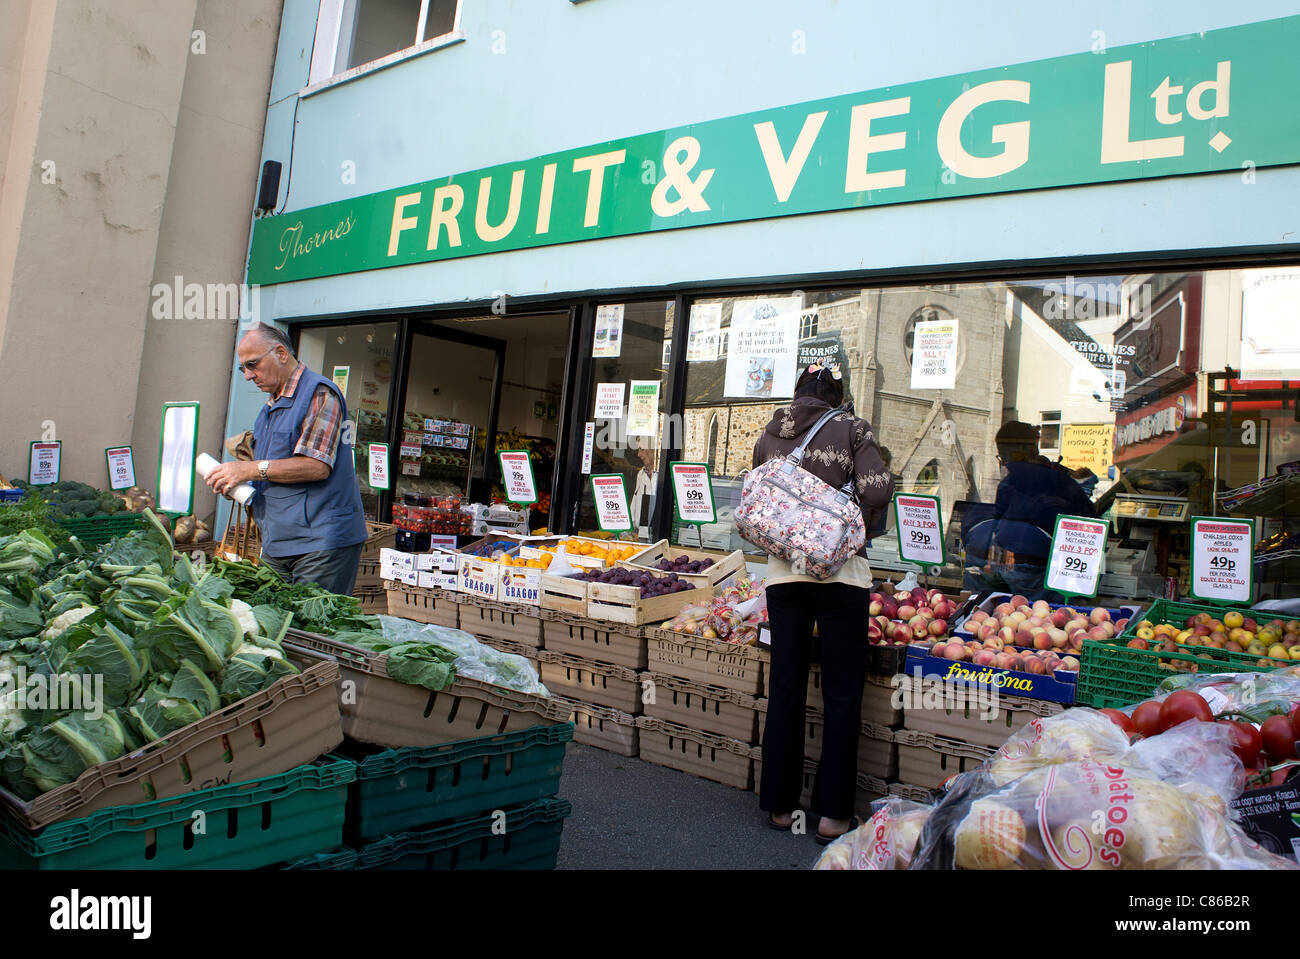 A traditional independent fruit & veg shop Stock Photo